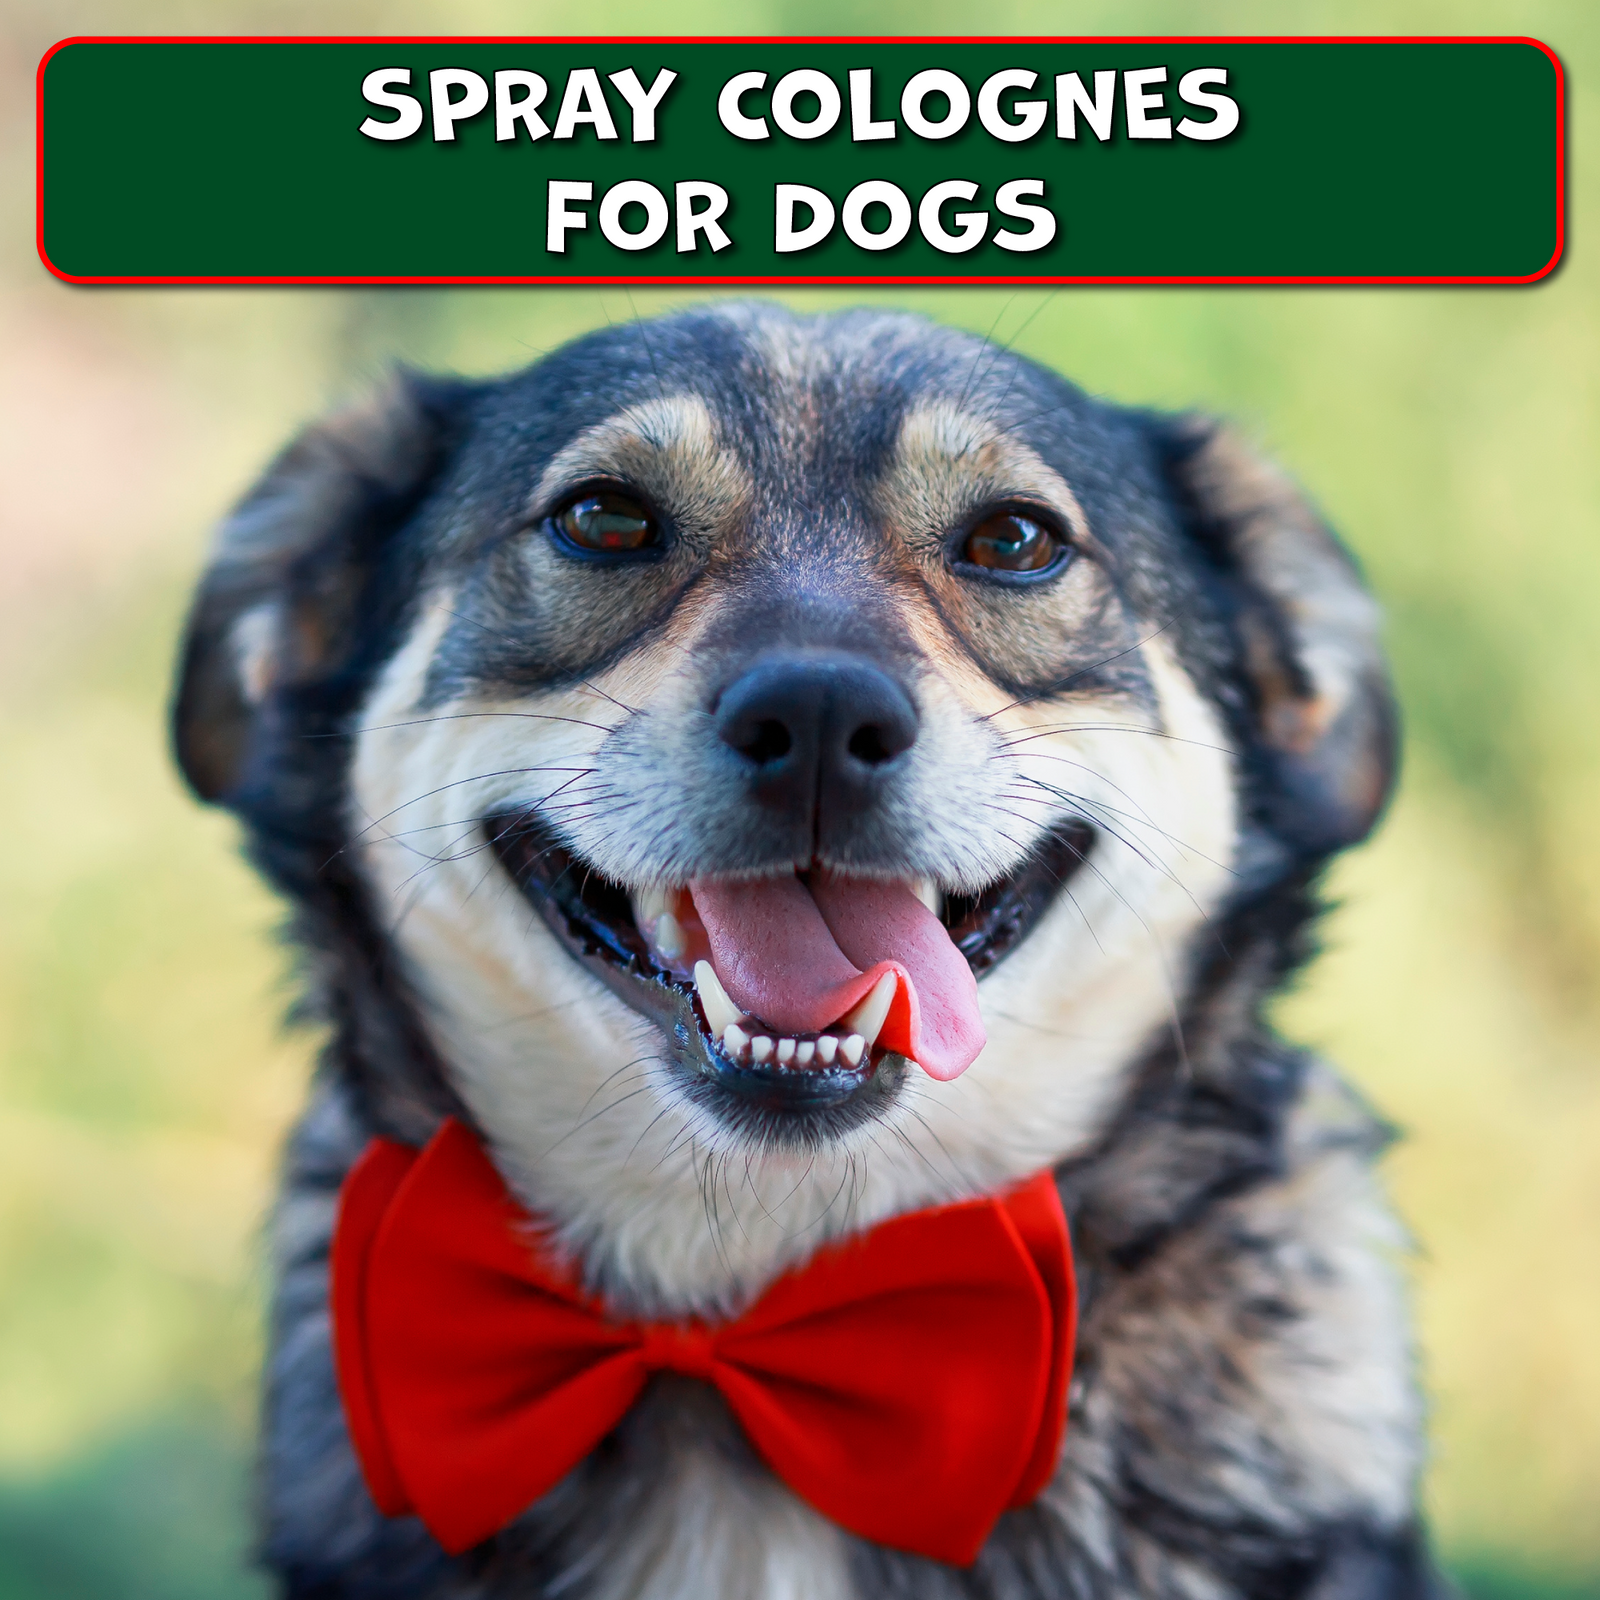 Spray Colognes for Dogs